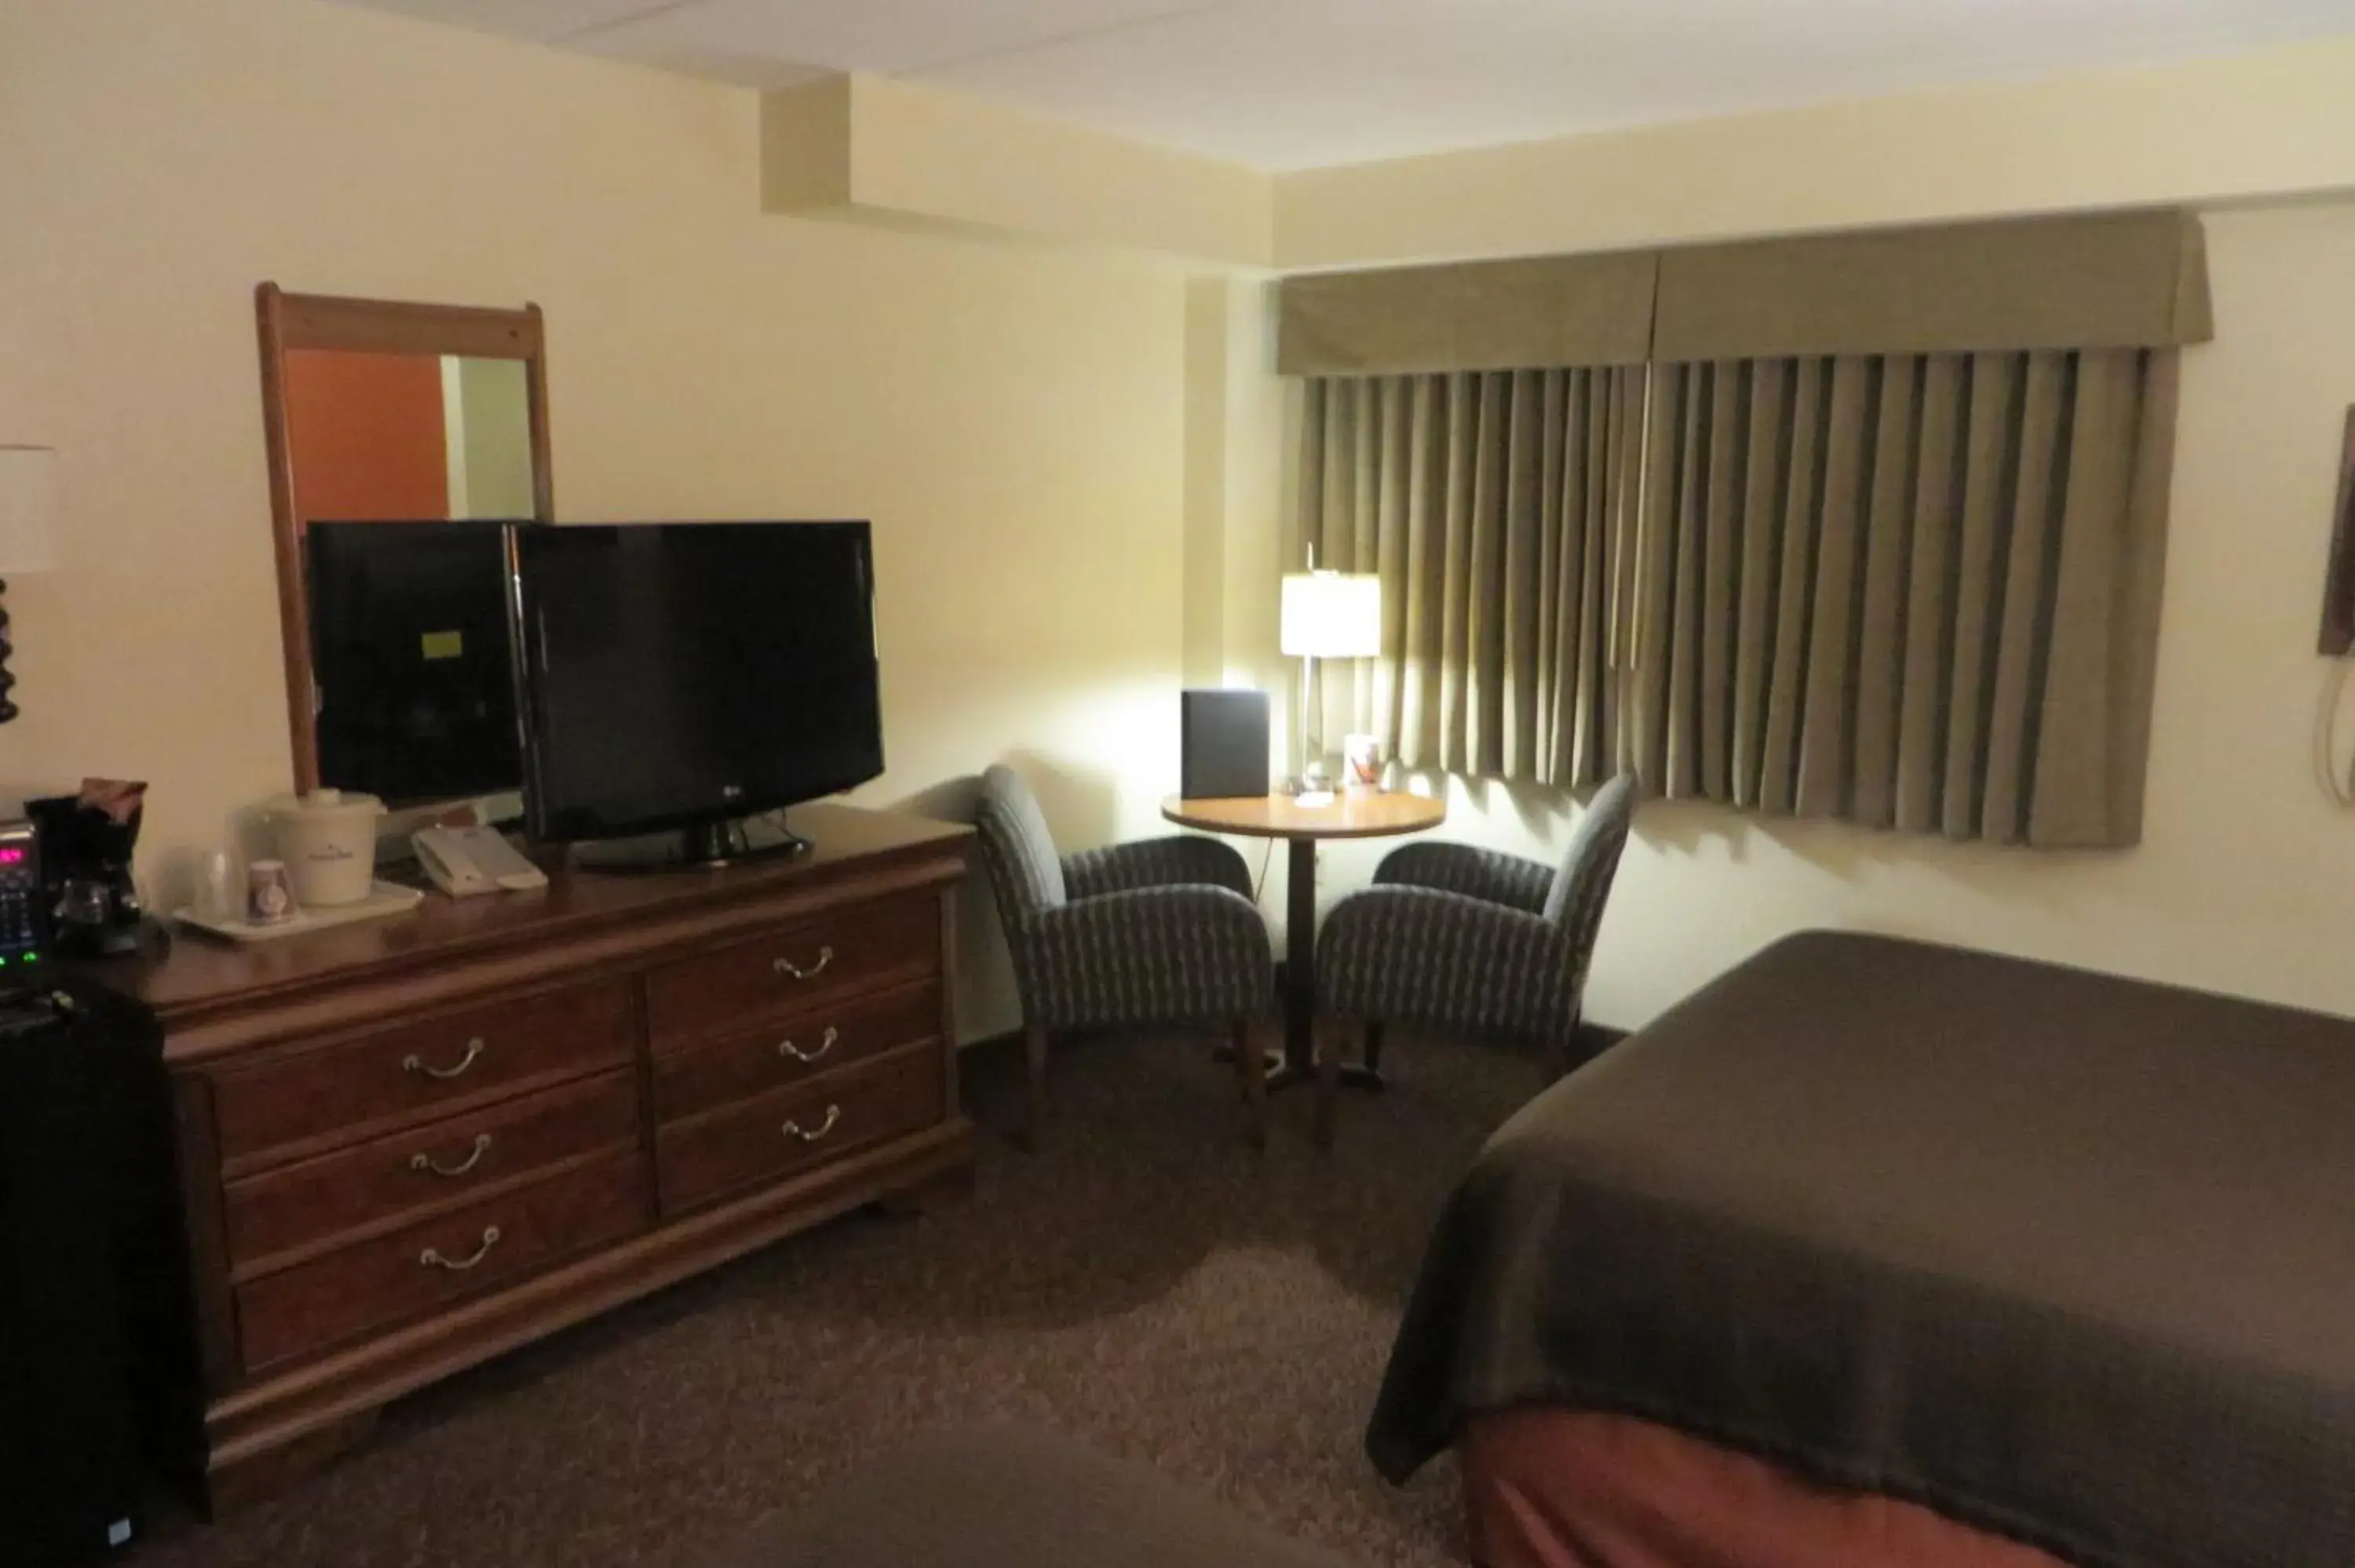 TV and multimedia in AmericInn by Wyndham Forest Lake